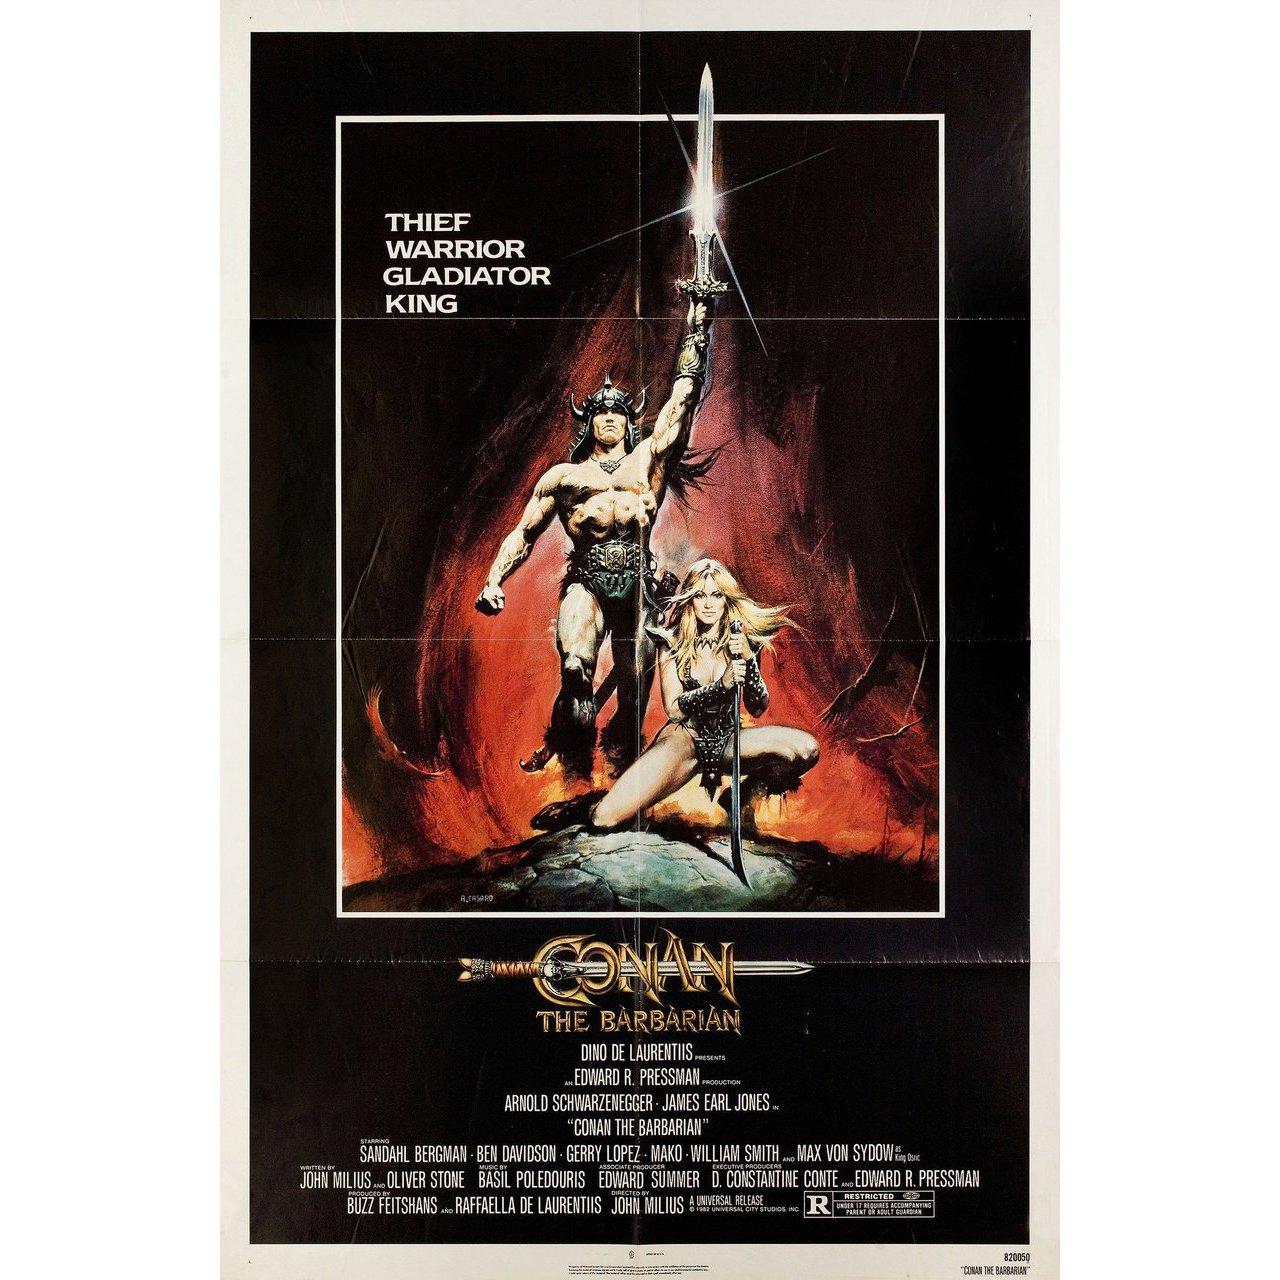 Original 1982 U.S. one sheet poster by Renato Casaro for the film Conan the Barbarian directed by John Milius with Arnold Schwarzenegger / James Earl Jones / Max von Sydow / Sandahl Bergman. Very good condition, folded. Many original posters were